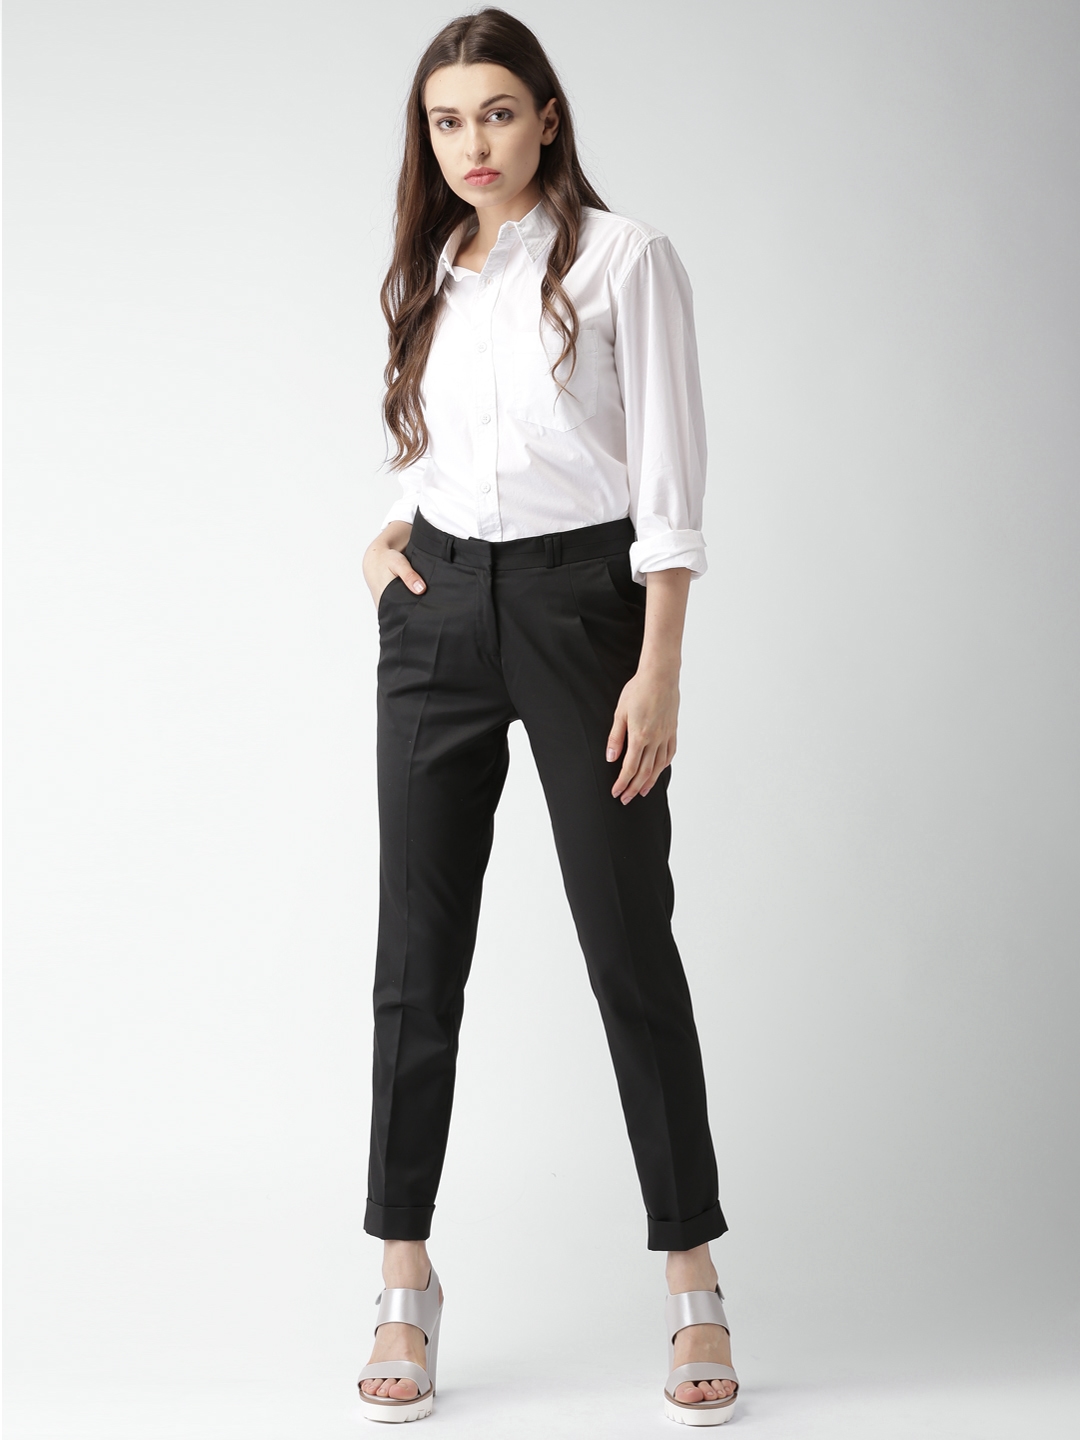 Enjoy more than 155 formal pants for women latest